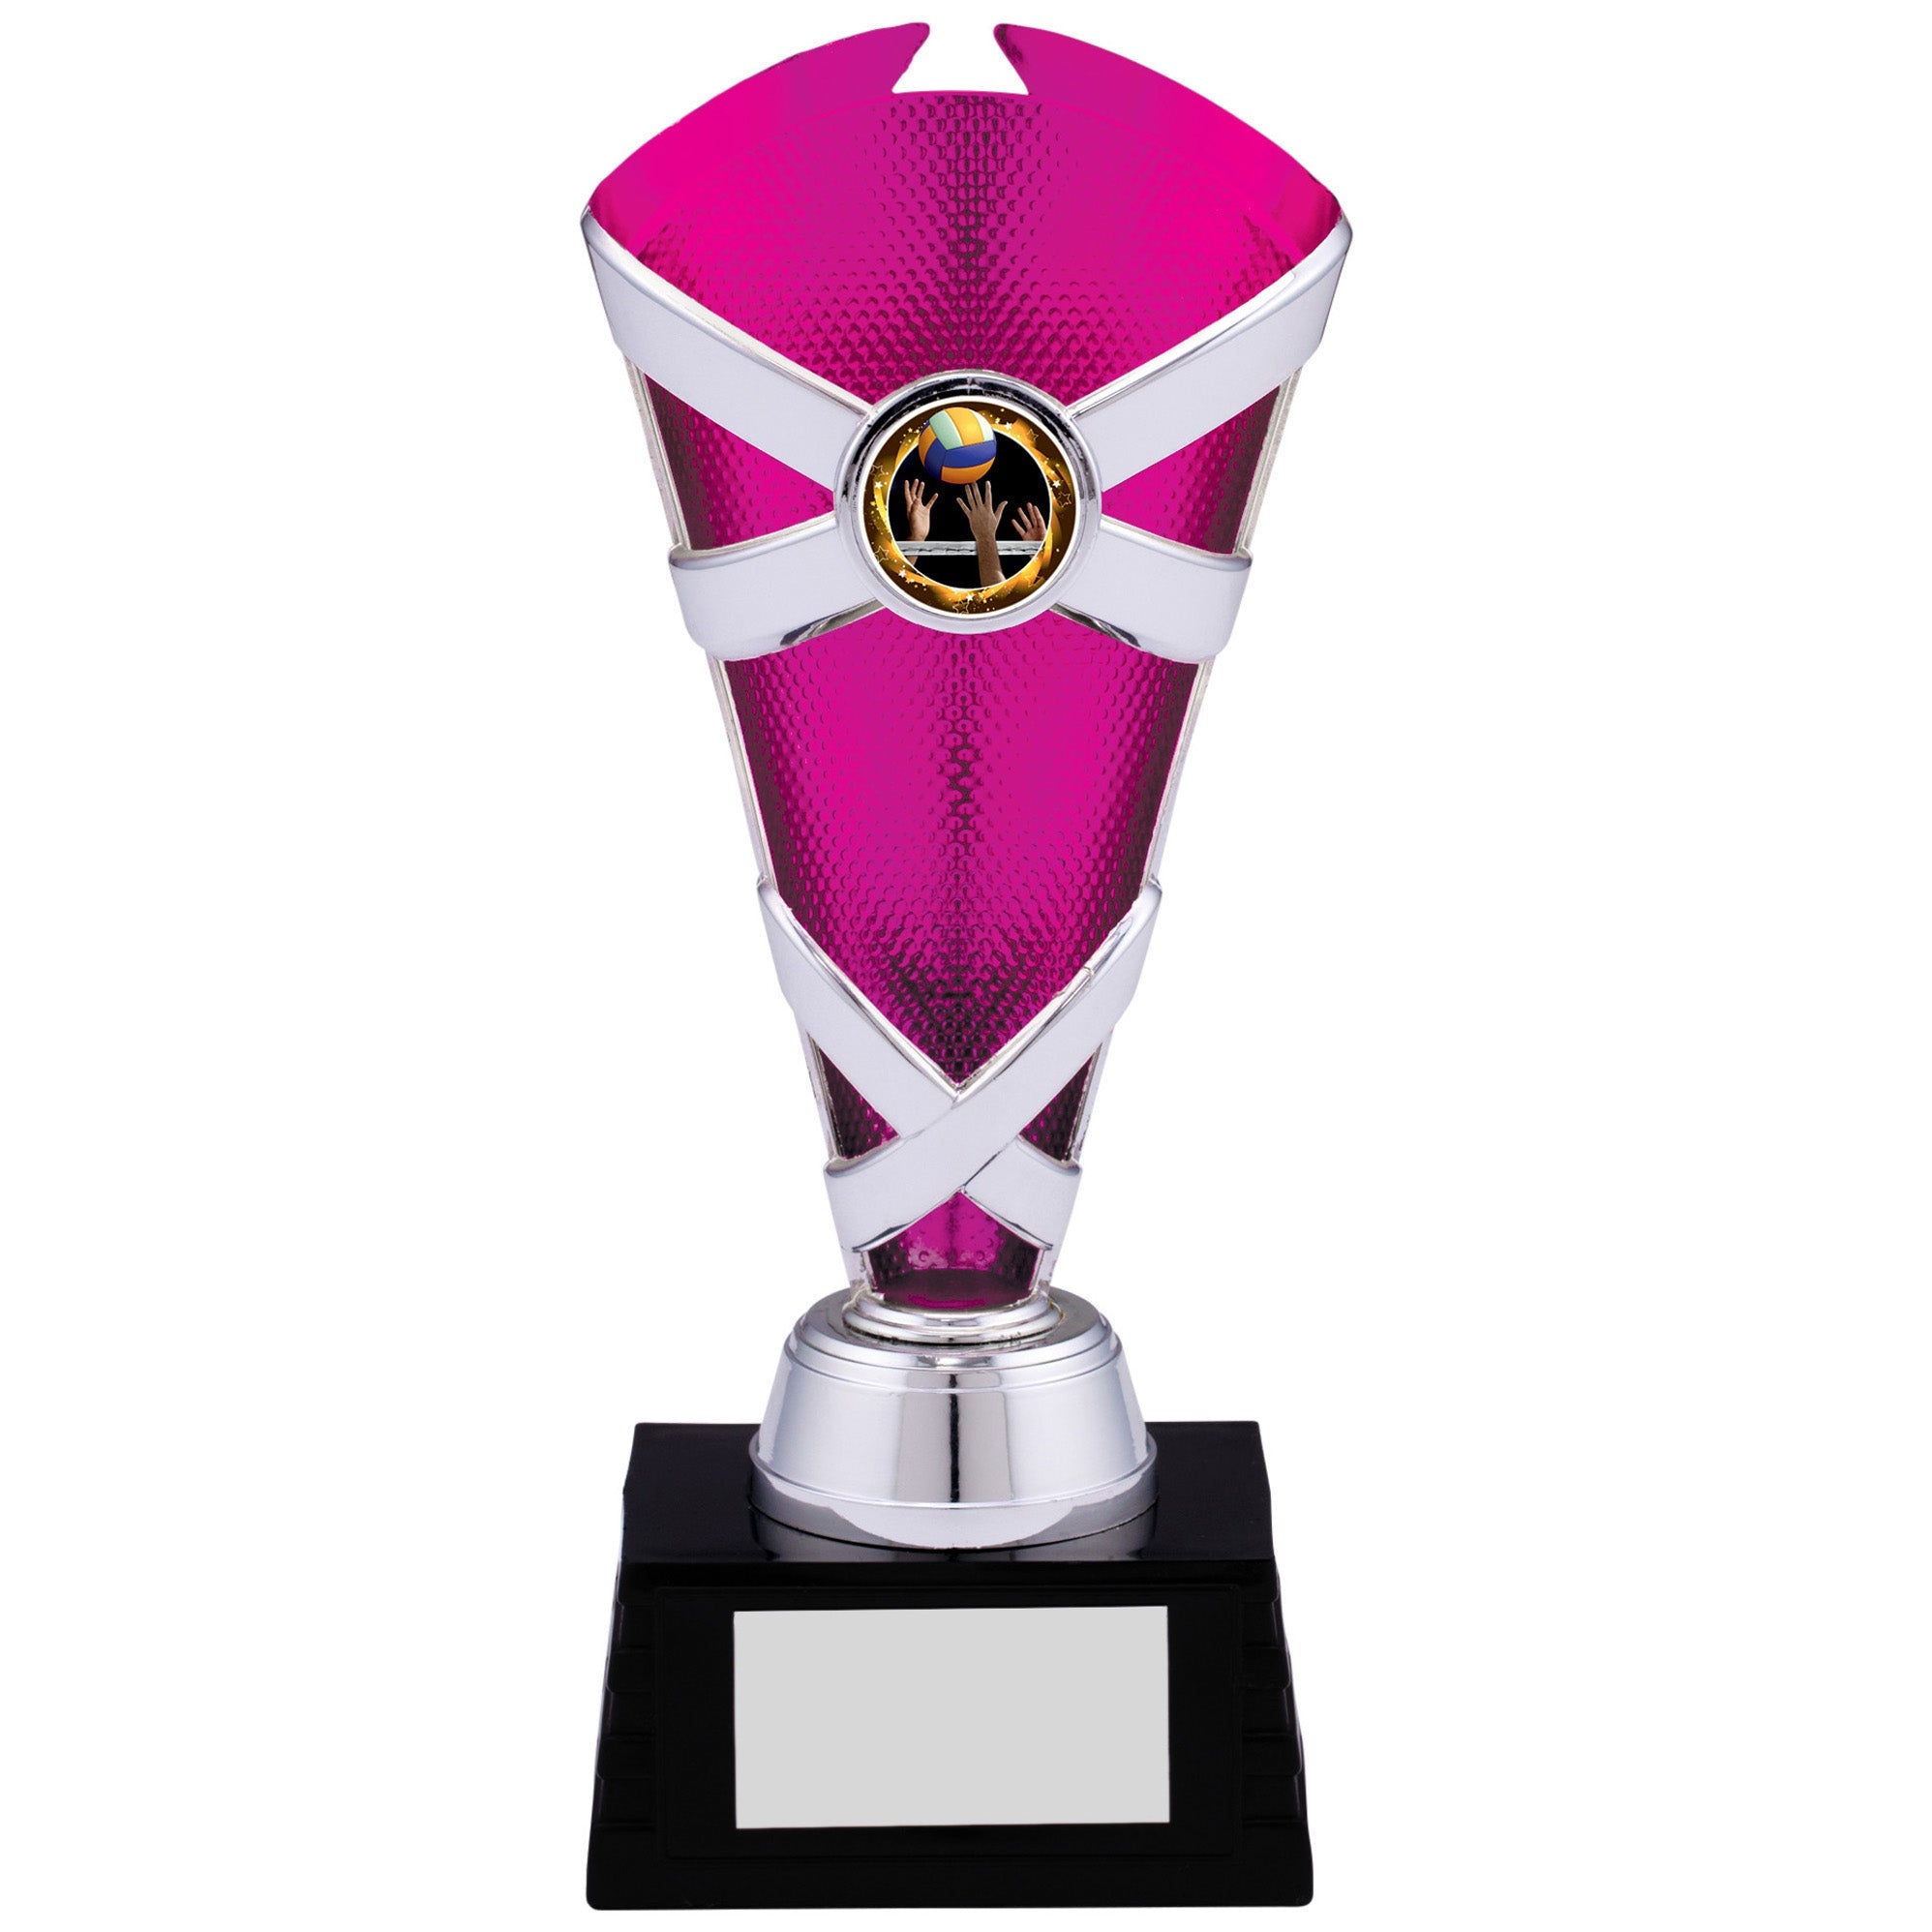 Criss Cross Silver and Pink Plastic Trophy Cup